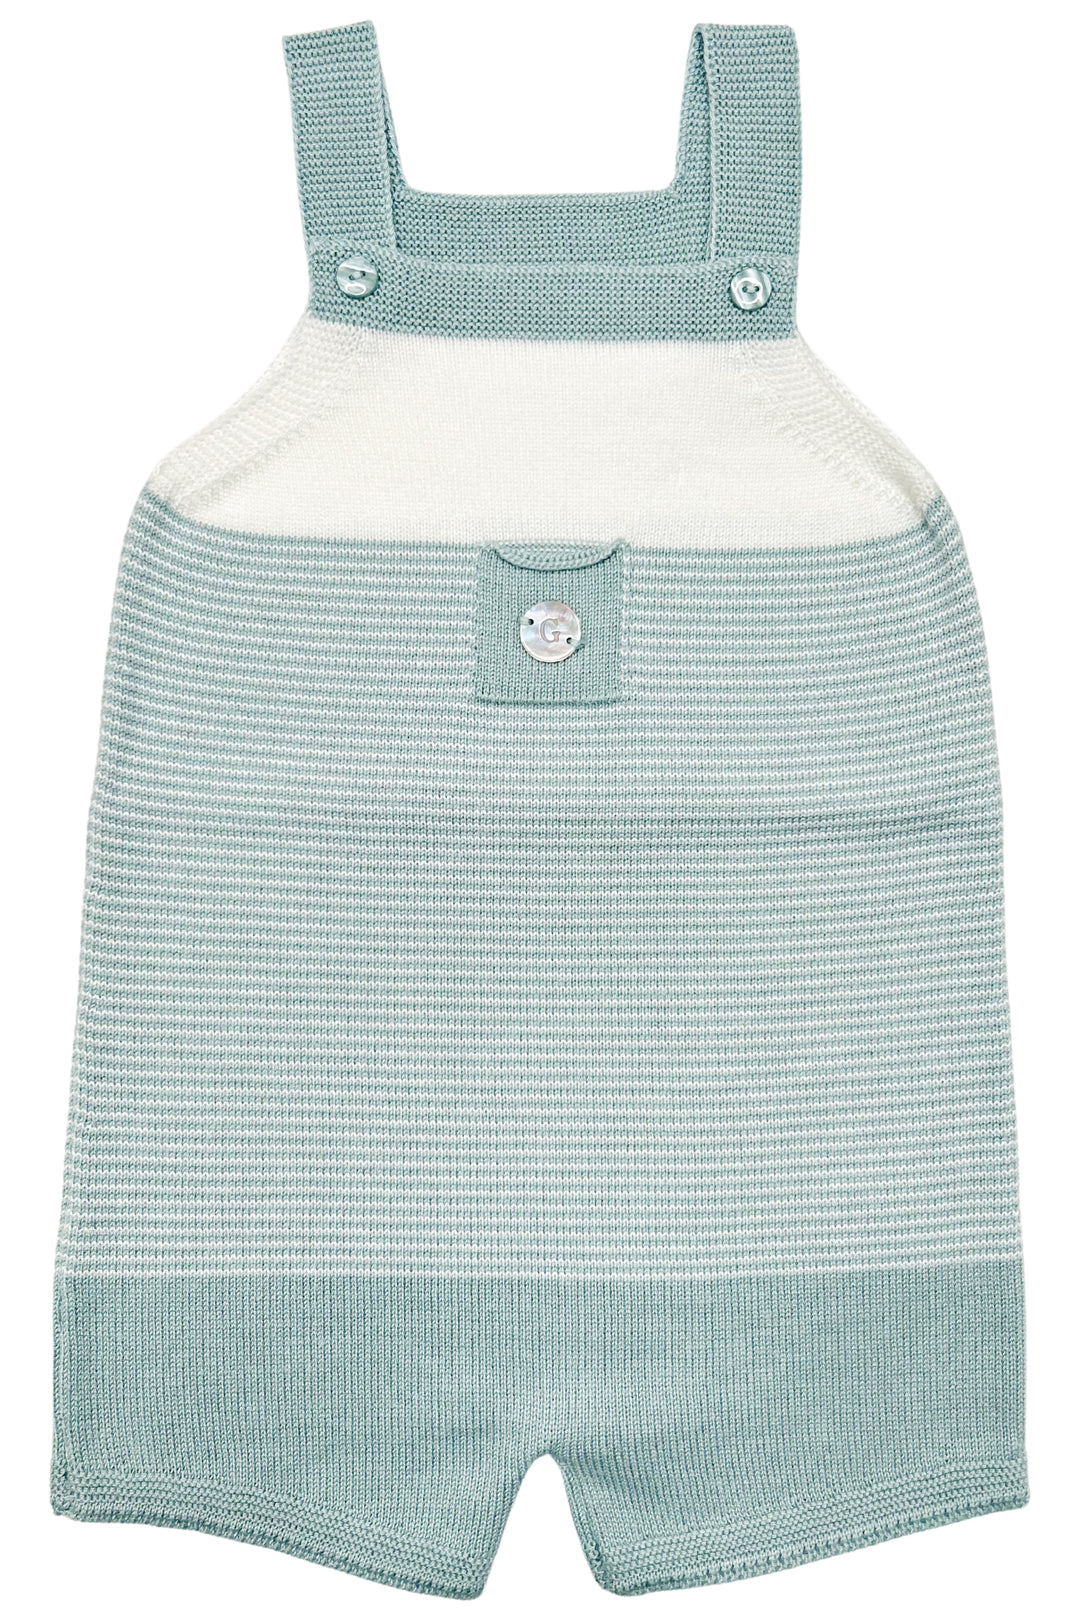 Granlei "Jagger" Teal Striped Knit Dungarees | Millie and John